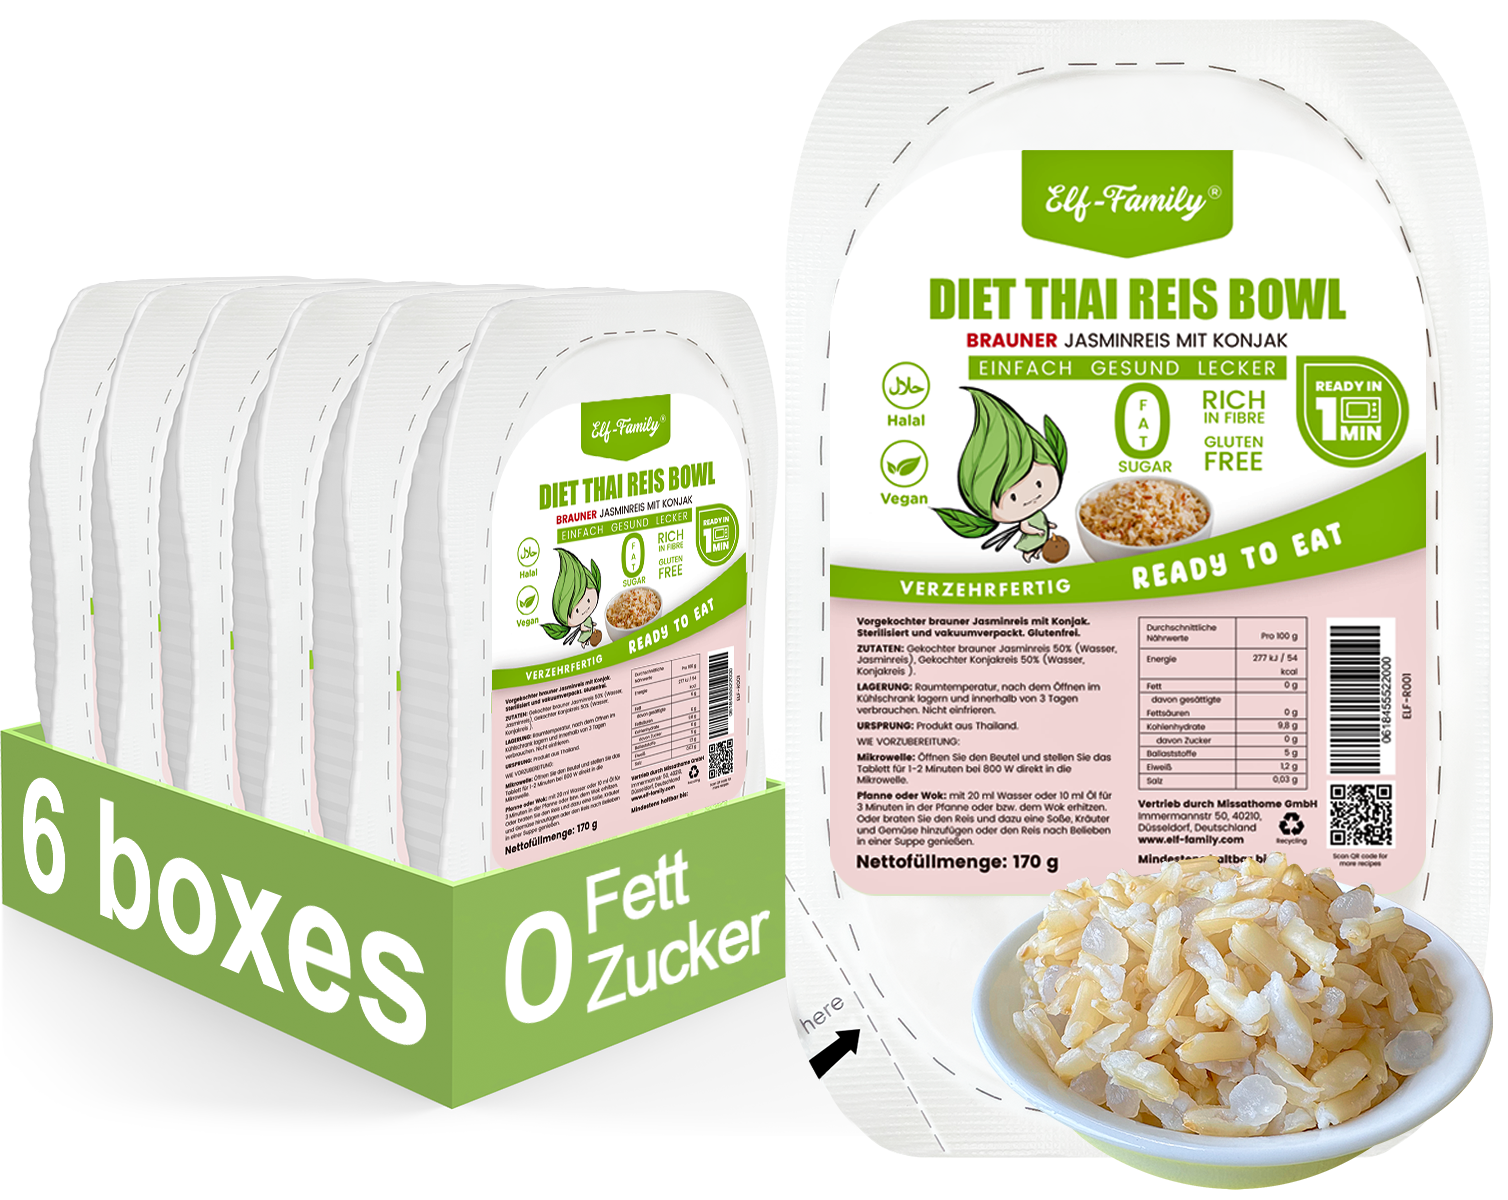 Elf-Family Konjak Rice Thai Brown Shirataki Bowl - [Diet Box for 1 Week] - Instant Jasmine Rice - Ready Meals for Microwave - Natural Superfoods Micronutrients - Vegan/Low Carb/Fat Free - Box of 6 